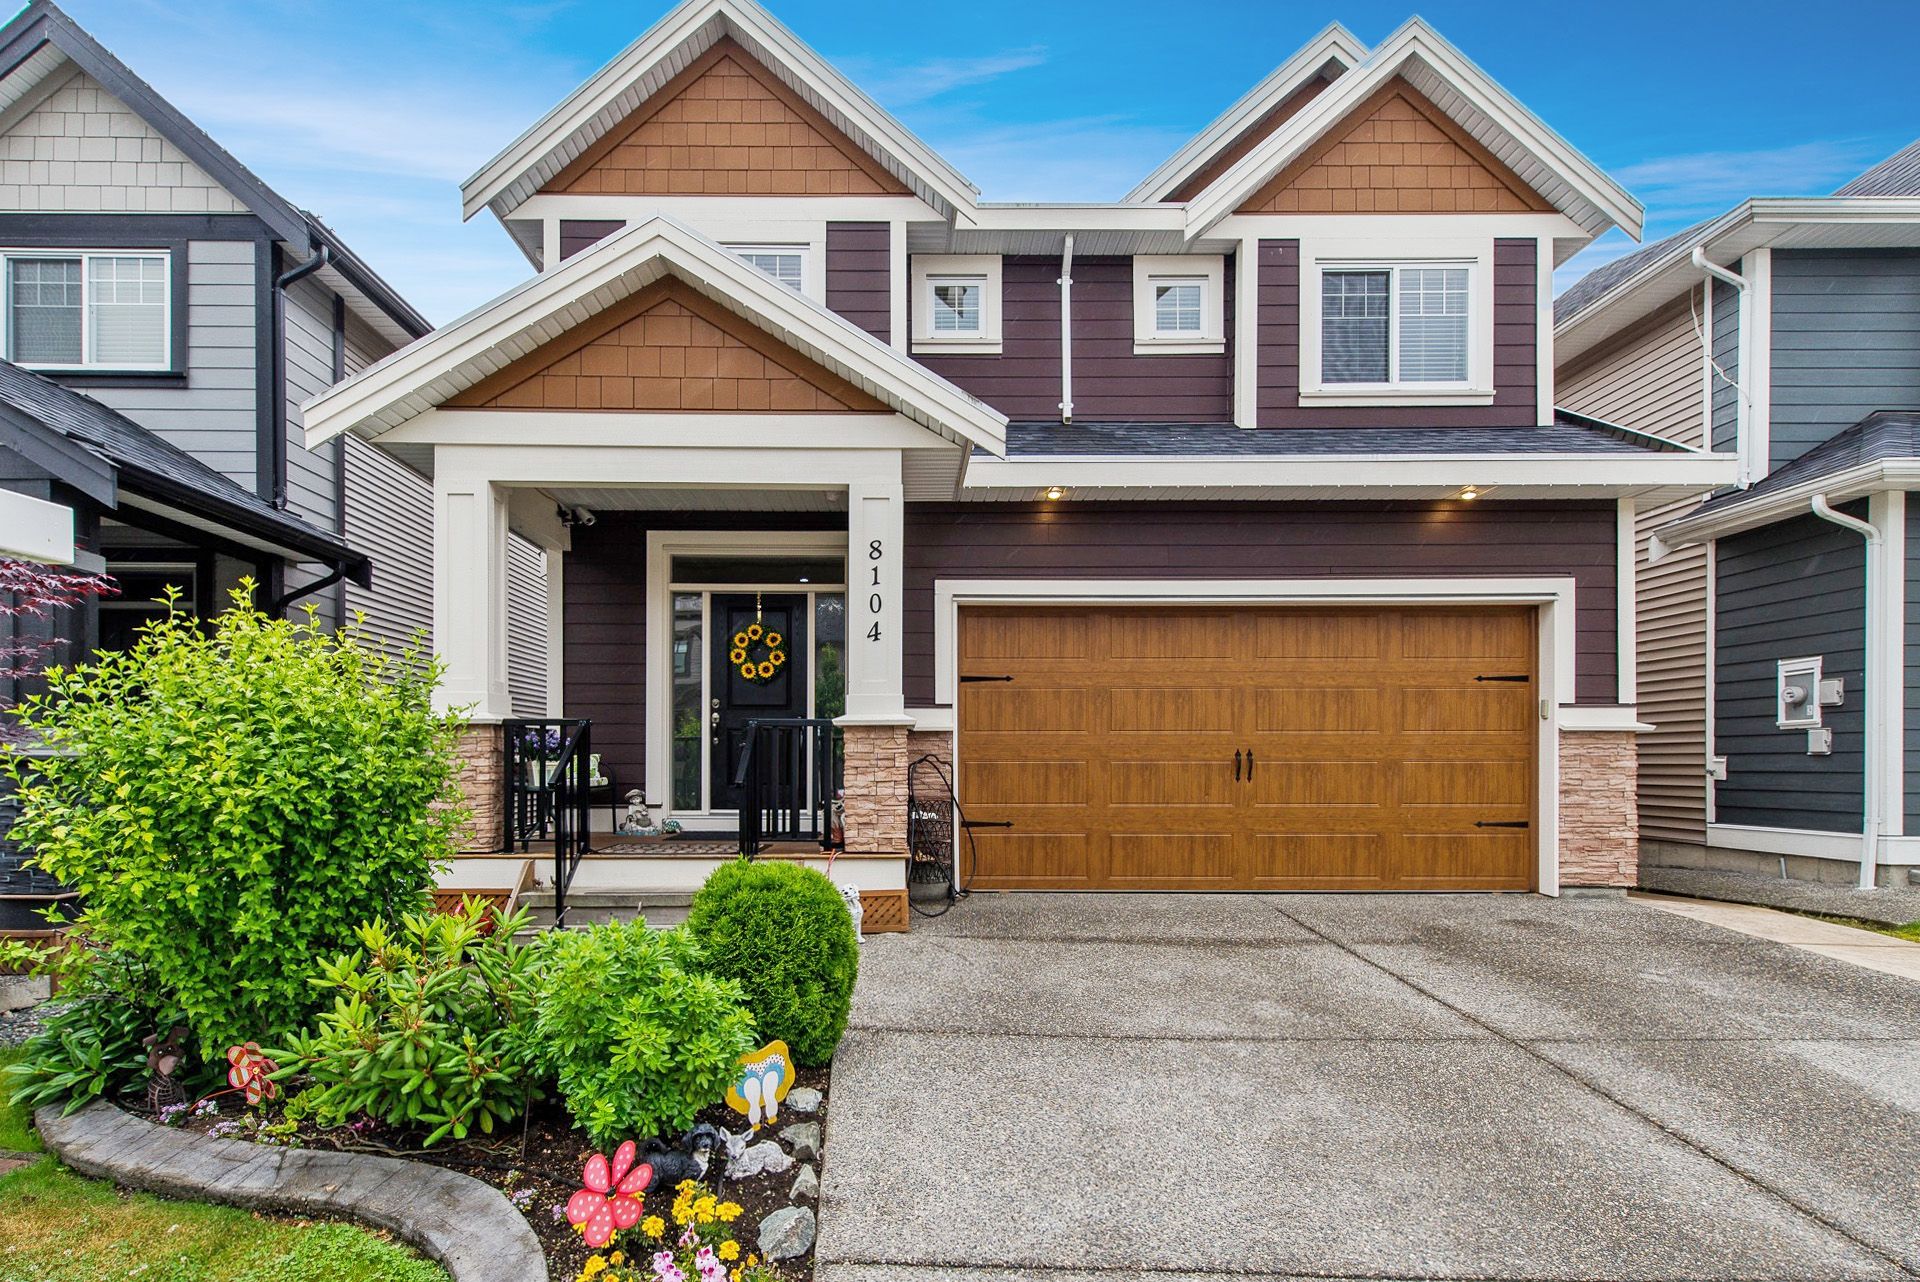 Hot new listing! Just listed in Willoughby Heights, Langley